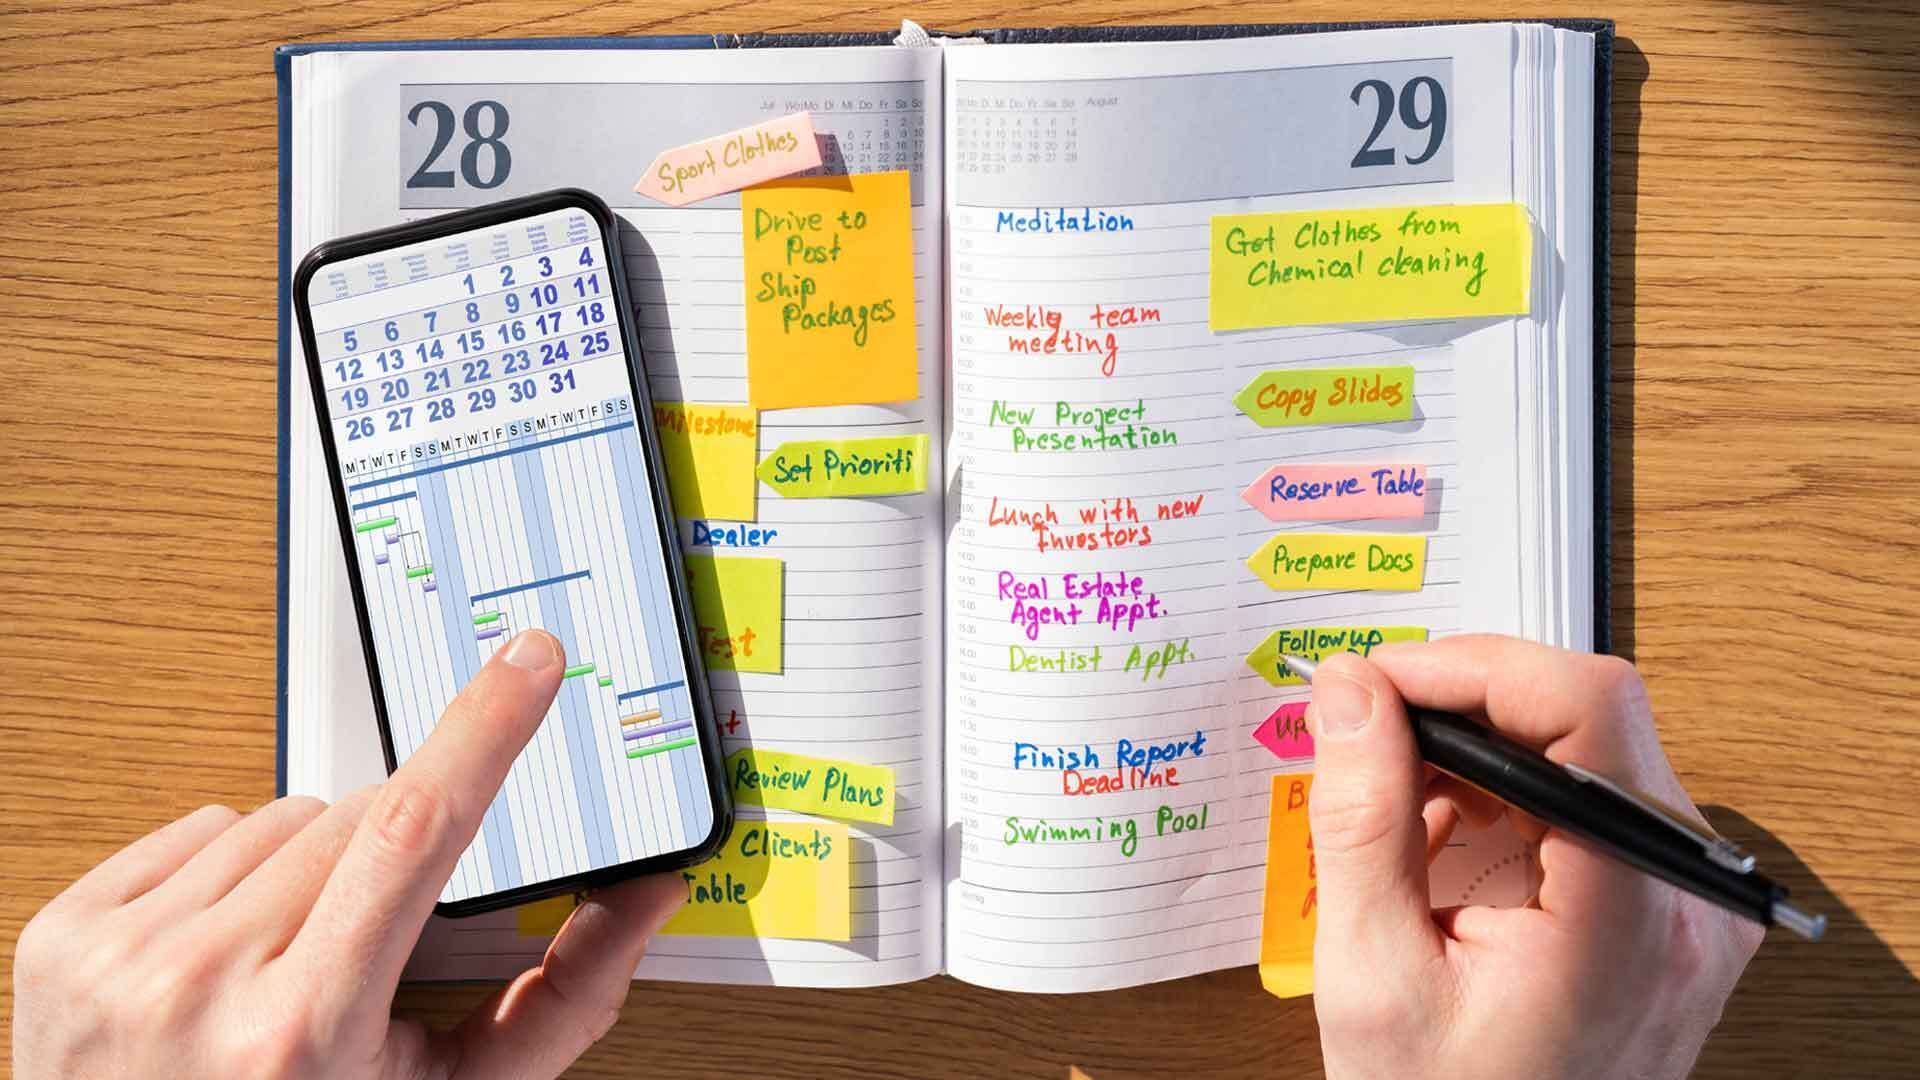 Less stress: How to integrate a weekly schedule into your everyday life